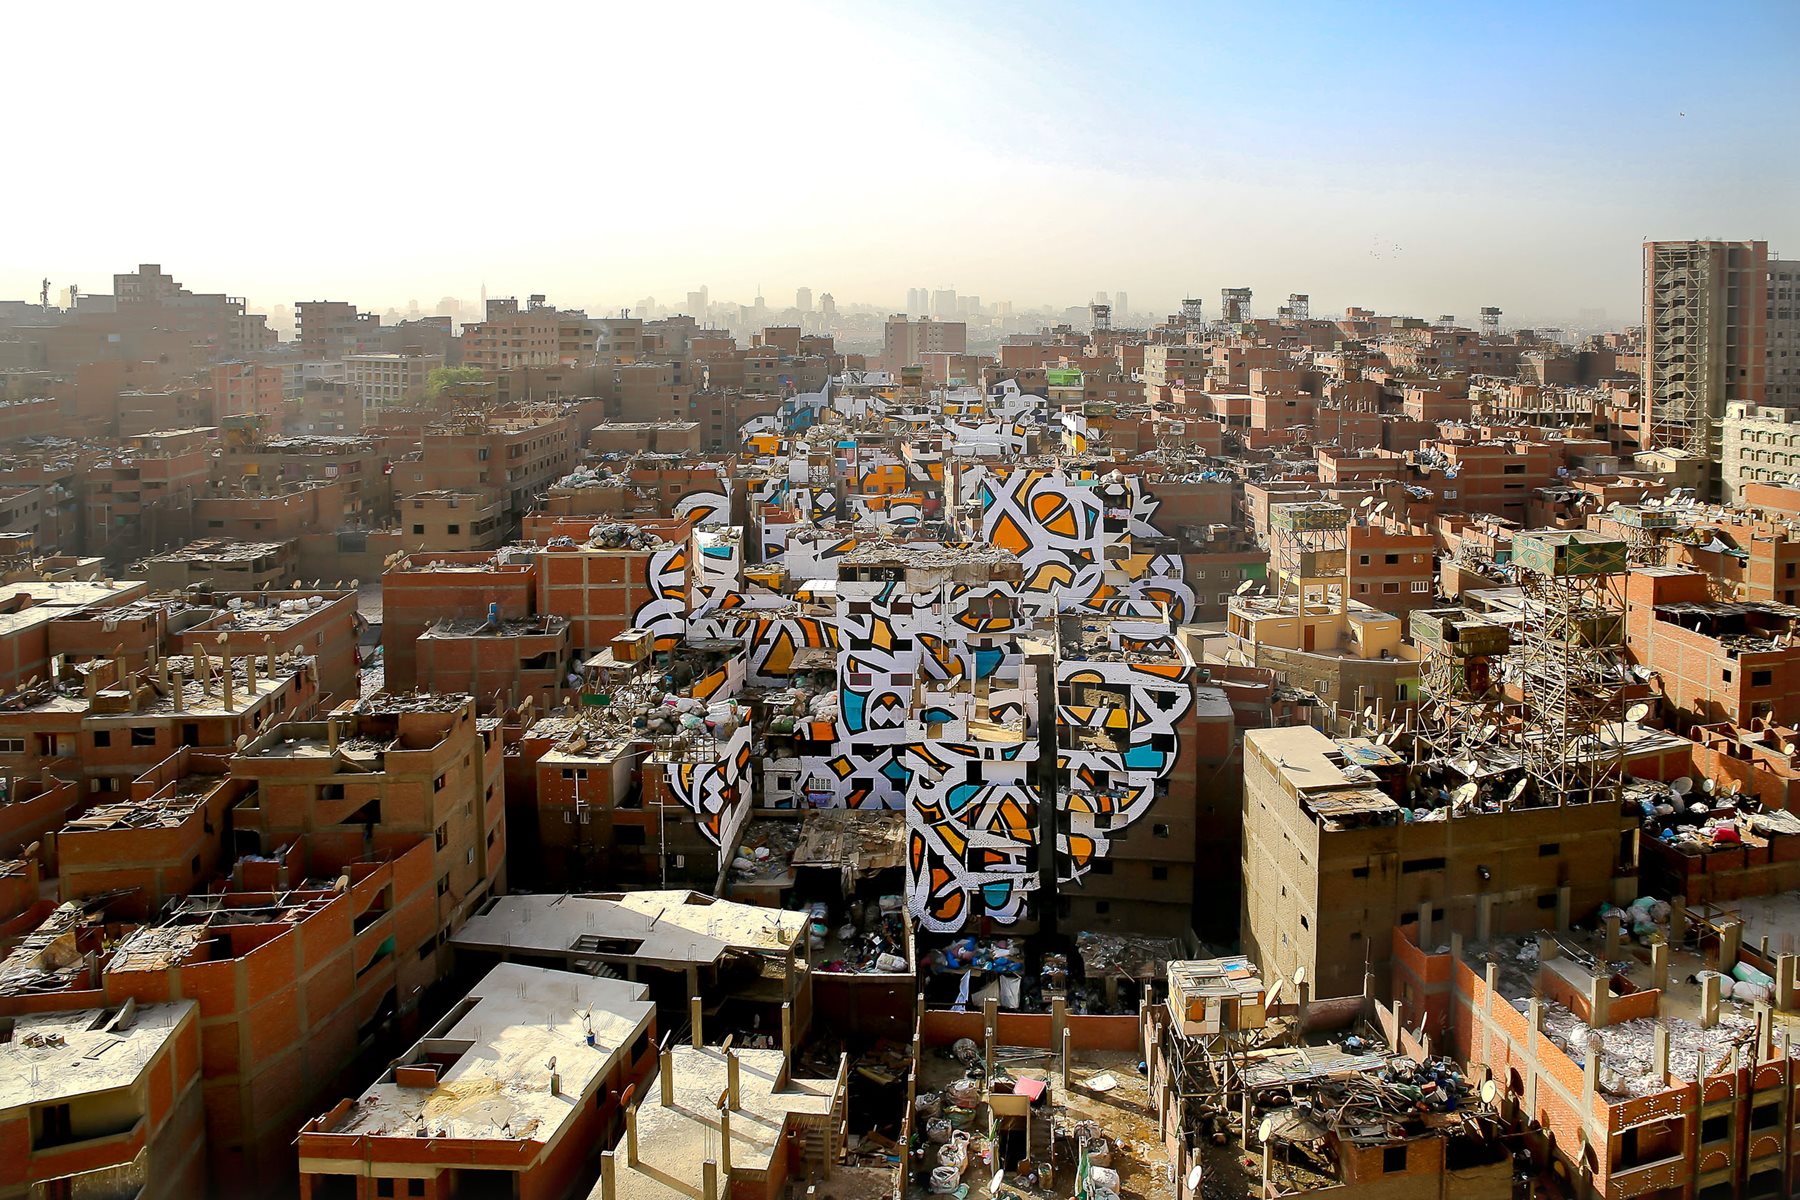 In his most complex calligraffiti project to date, eL Seed spent much of 2016 painting more than 50 buildings in Cairo to create &ldquo;Perception.&rdquo; It translates: &ldquo;Anyone who wants to see the sunlight clearly must first wipe his eyes&rdquo;&mdash;words visible in full only from a single vantage point.